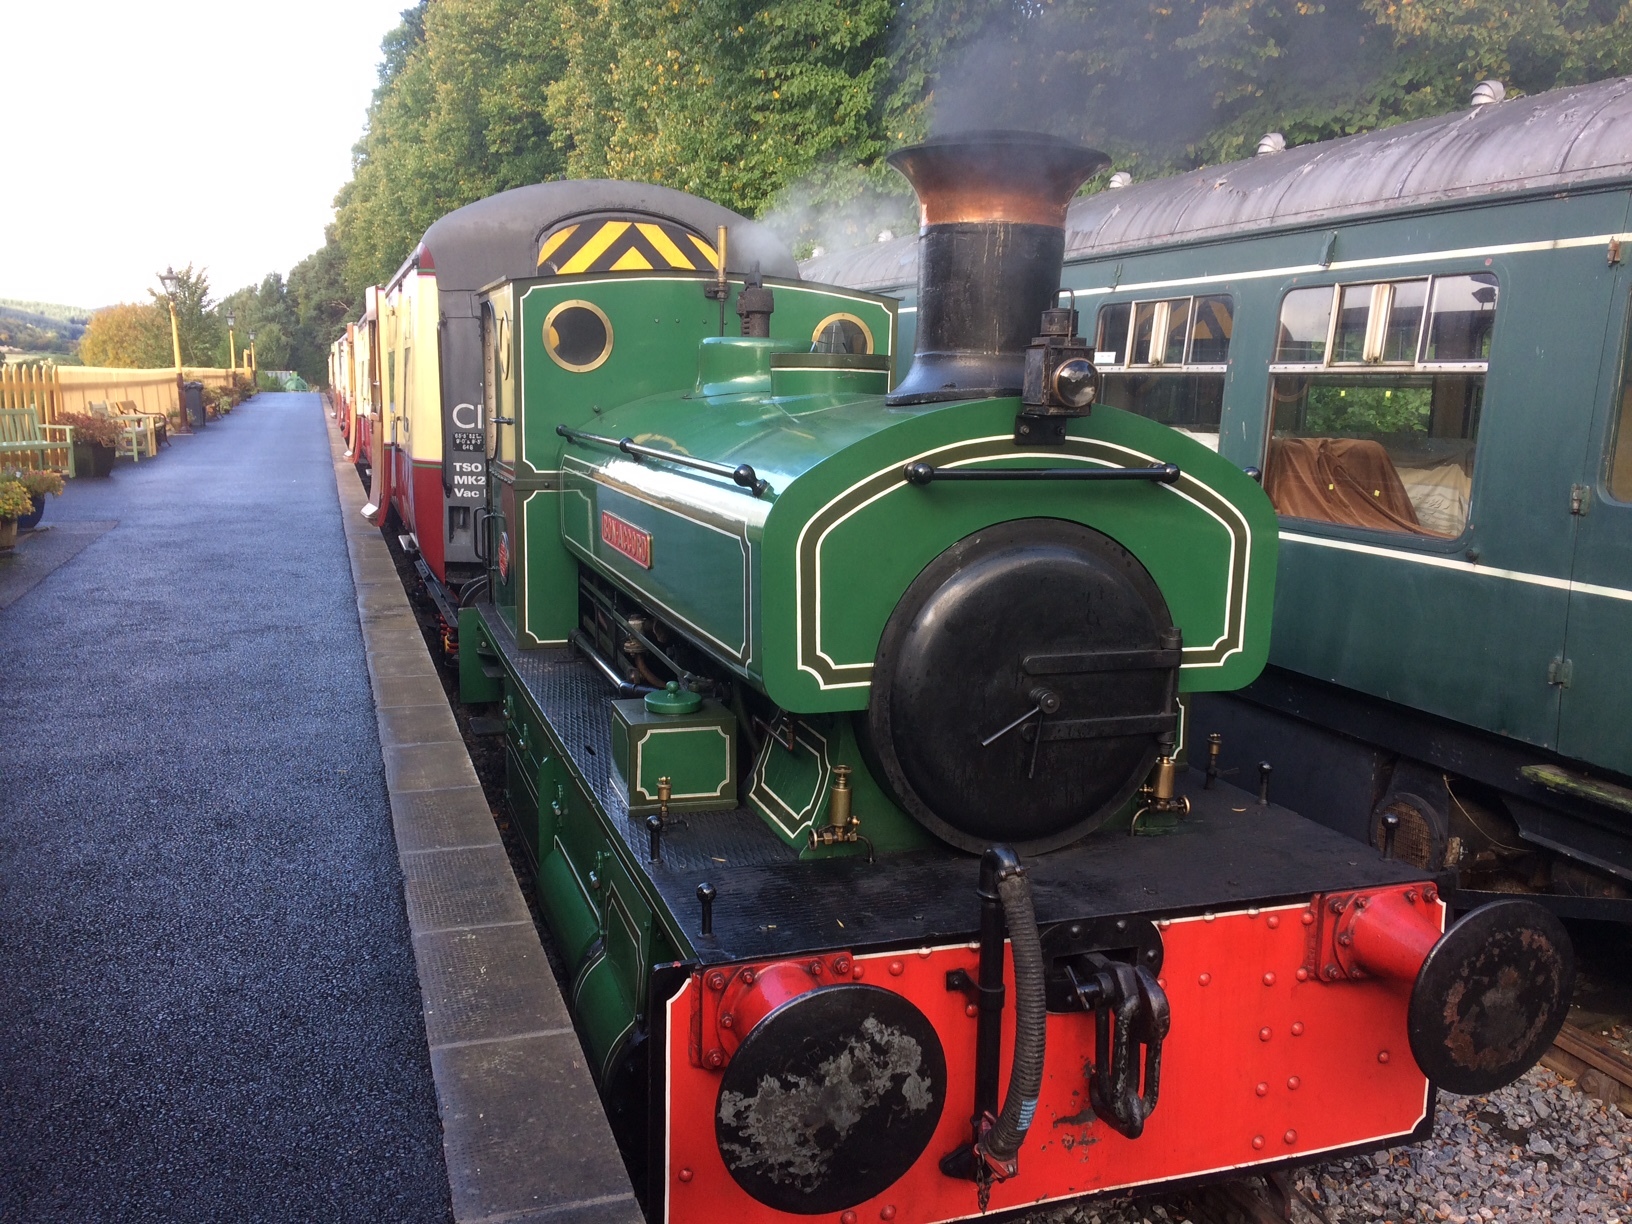 The Bon Accord pulling three passenger carriages for the first time at the Royal Deeside railway.